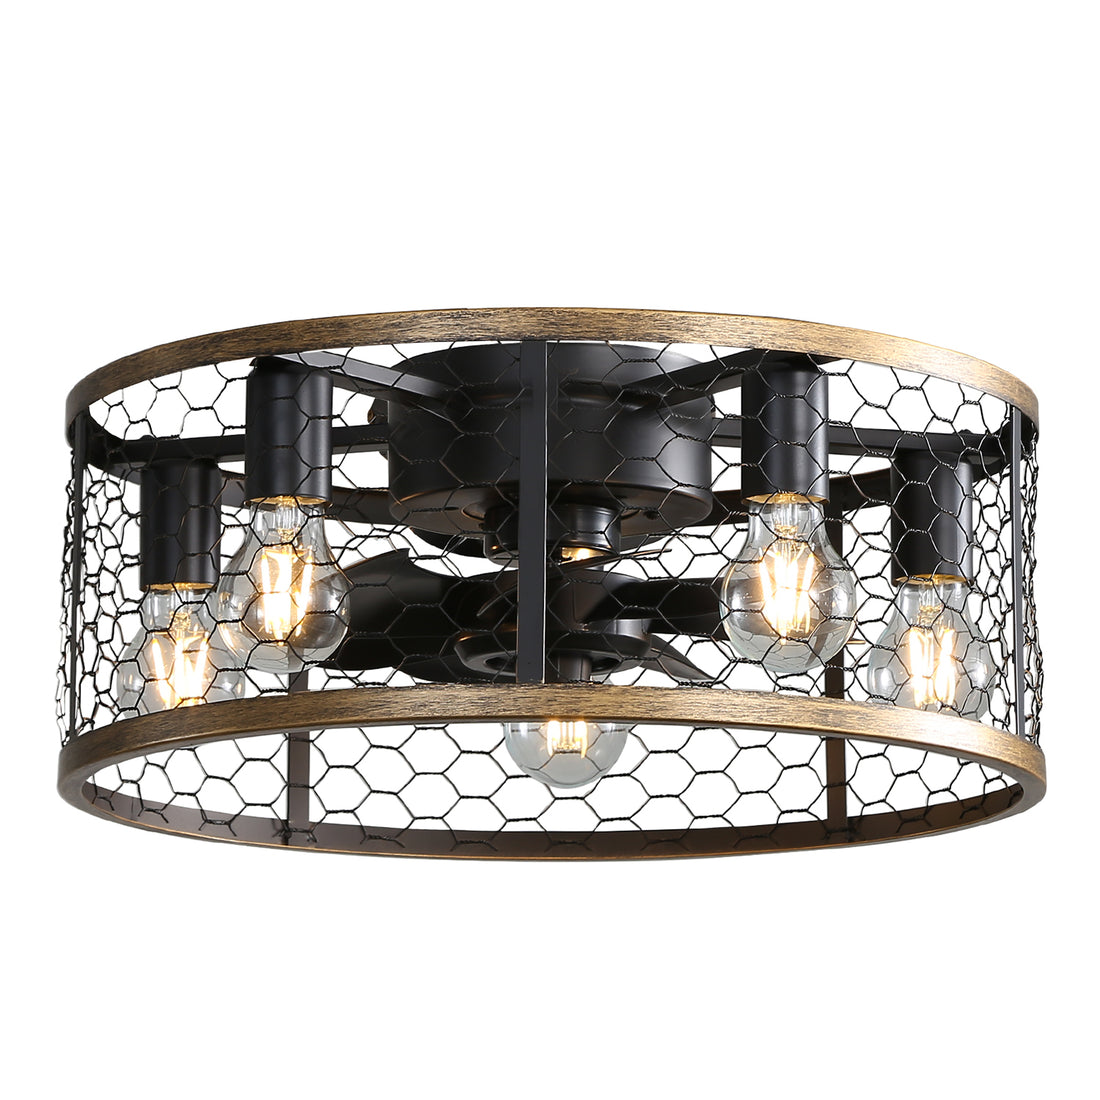 20 Inch Industrial Caged Ceiling Fan, With 7 ABS black-metal